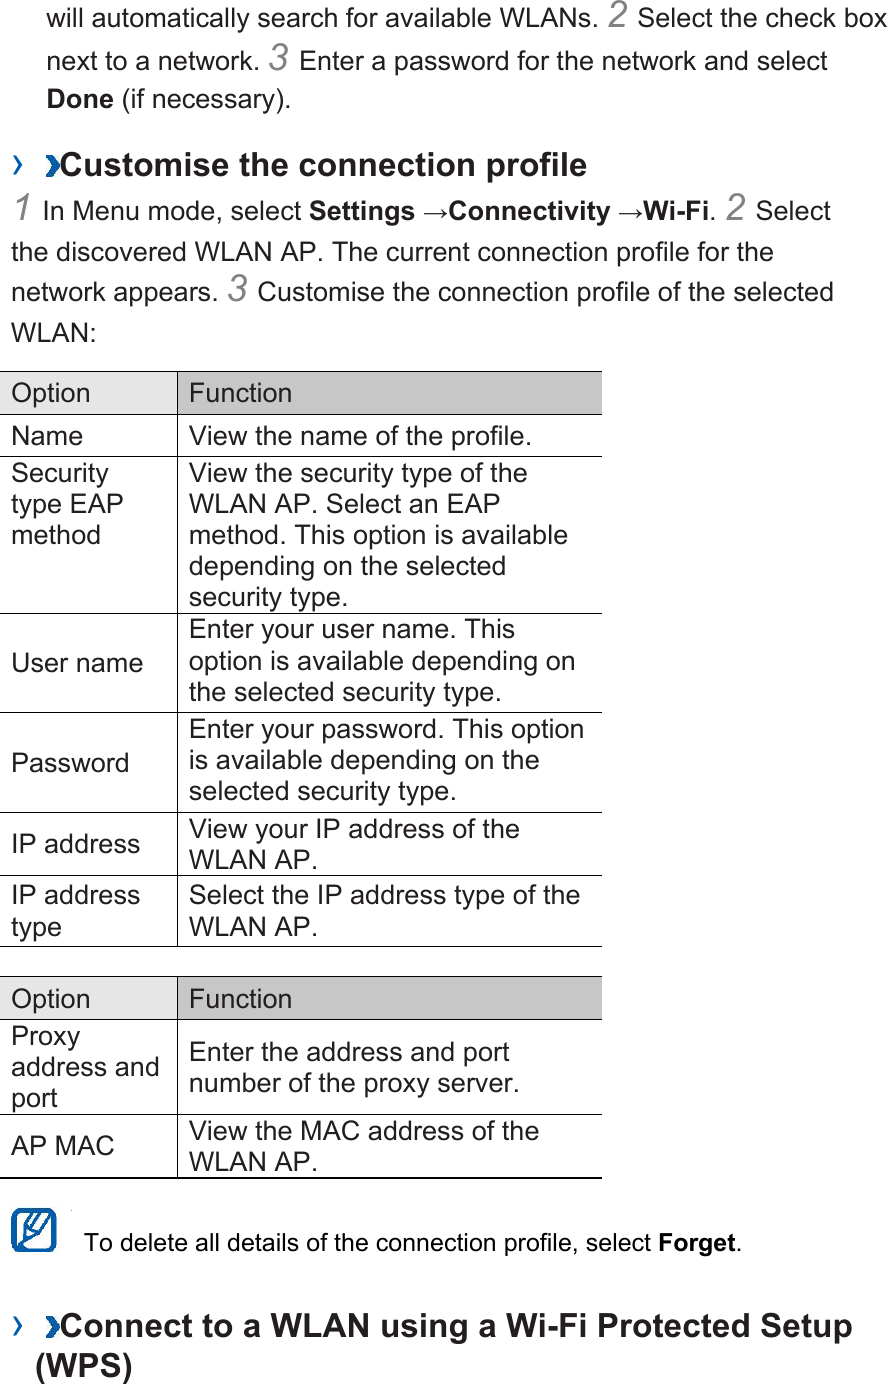 will automatically search for available WLANs. 2Select the check box next to a network. 3Enter a password for the network and select Done (if necessary).   ›  Customise the connection profile   1In Menu mode, select Settings →Connectivity →Wi-Fi. 2Select the discovered WLAN AP. The current connection profile for the network appears. 3Customise the connection profile of the selected WLAN:   Option    Function   Name    View the name of the profile.   Security type EAP method   View the security type of the WLAN AP. Select an EAP method. This option is available depending on the selected security type.   User name   Enter your user name. This option is available depending on the selected security type.   Password   Enter your password. This option is available depending on the selected security type.   IP address    View your IP address of the WLAN AP.   IP address type   Select the IP address type of the WLAN AP.    Option    Function   Proxy address and port   Enter the address and port number of the proxy server.   AP MAC    View the MAC address of the WLAN AP.      To delete all details of the connection profile, select Forget.   ›  Connect to a WLAN using a Wi-Fi Protected Setup (WPS)  